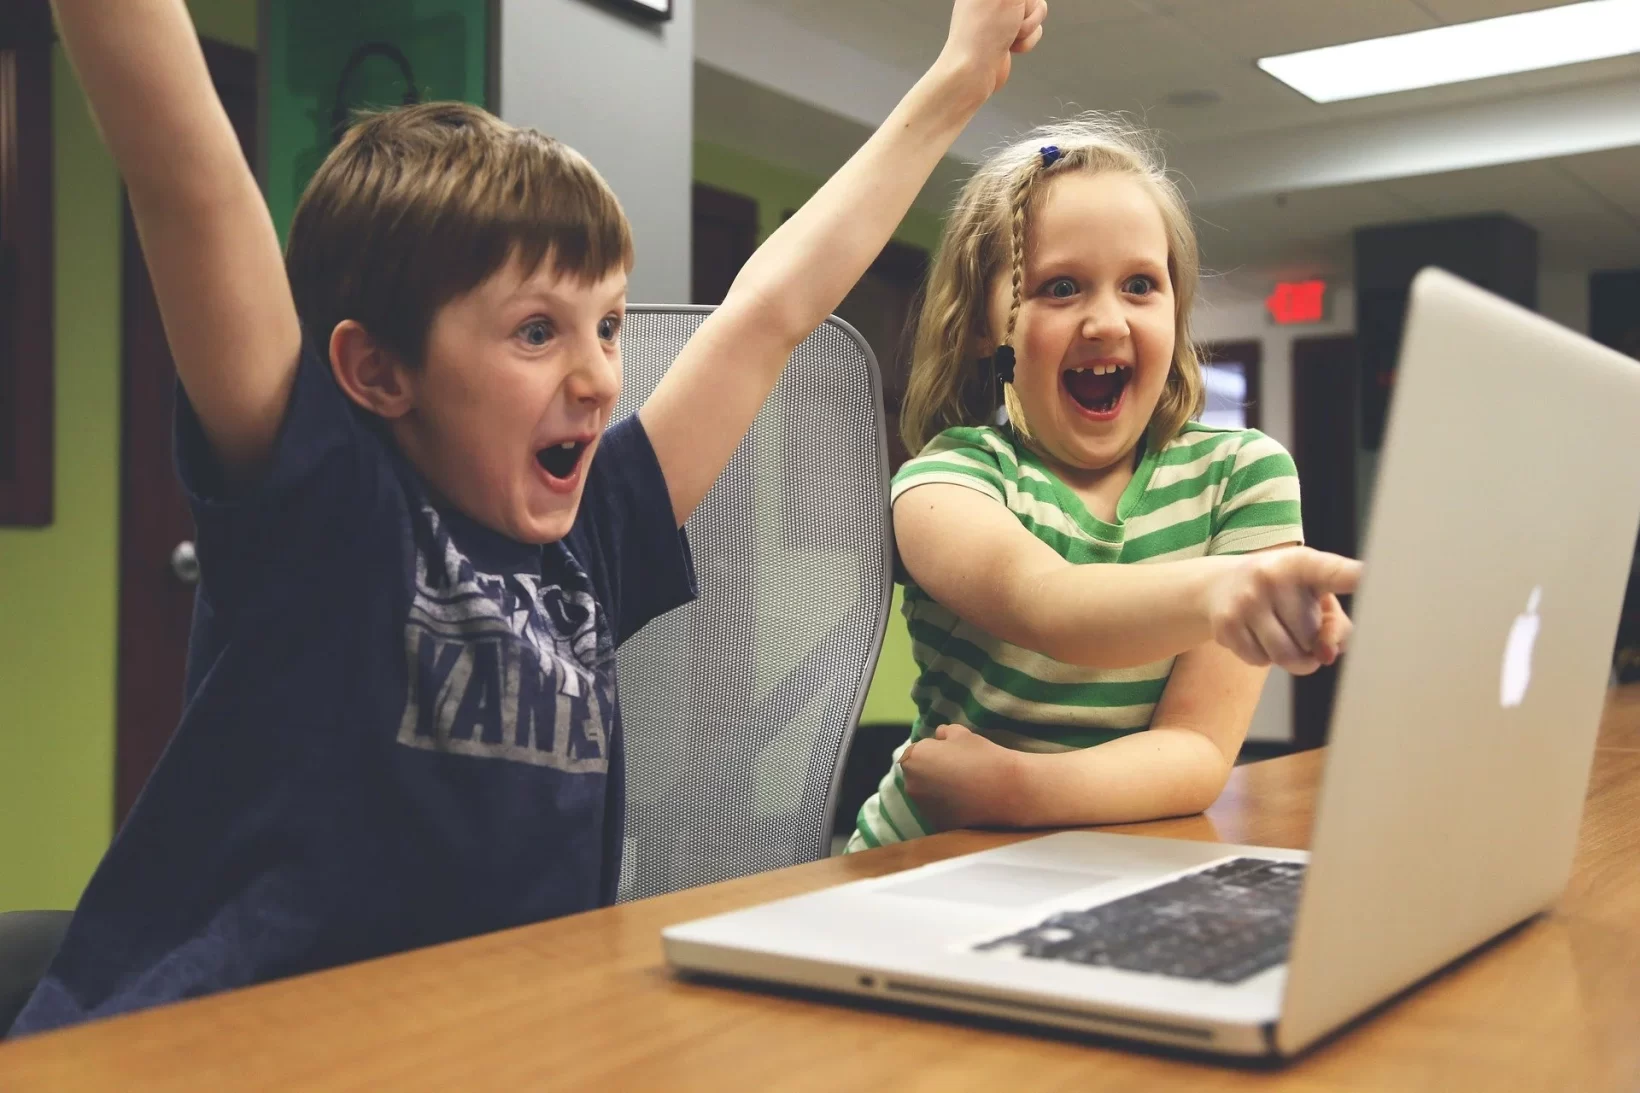 The image shows two happy children, one boy and a girl, and the girl is pointing towards the laptop.